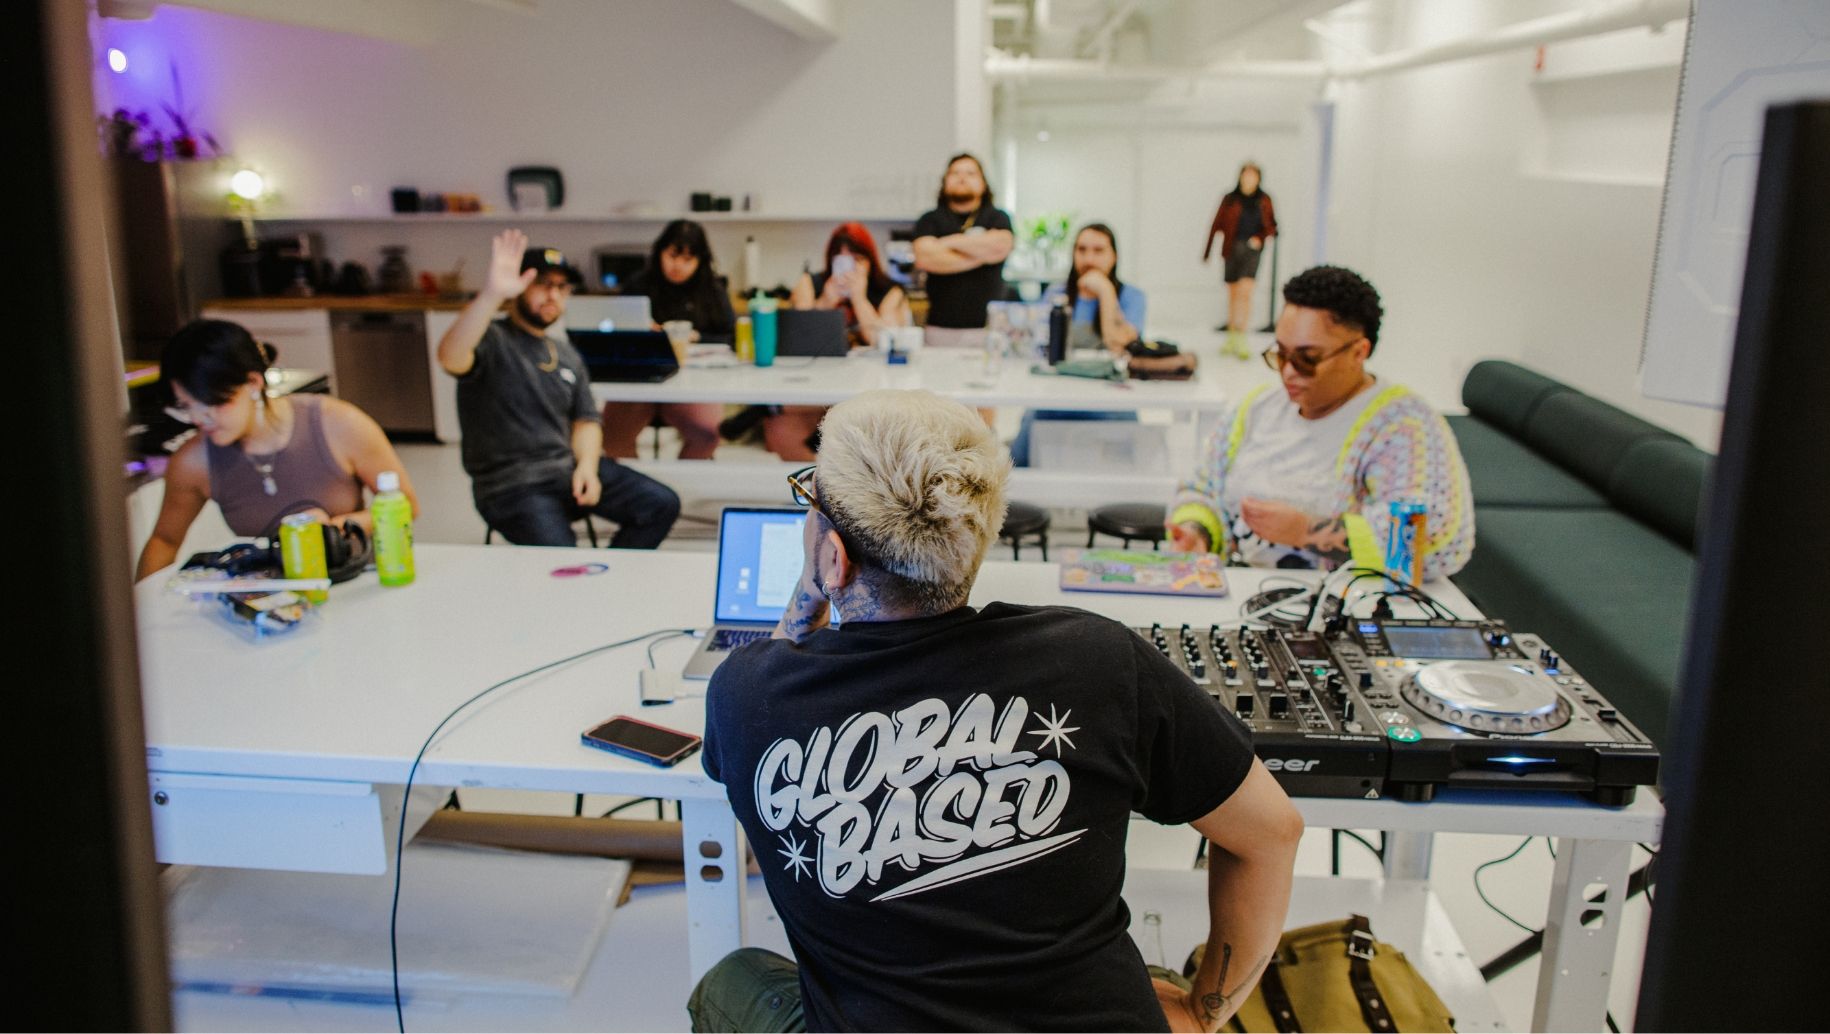 A group of people are gathered in a well-lit, modern room. One person with a "GLOBAL BASED" shirt is seated at a table with DJ equipment, while others sit near laptops and raise hands.